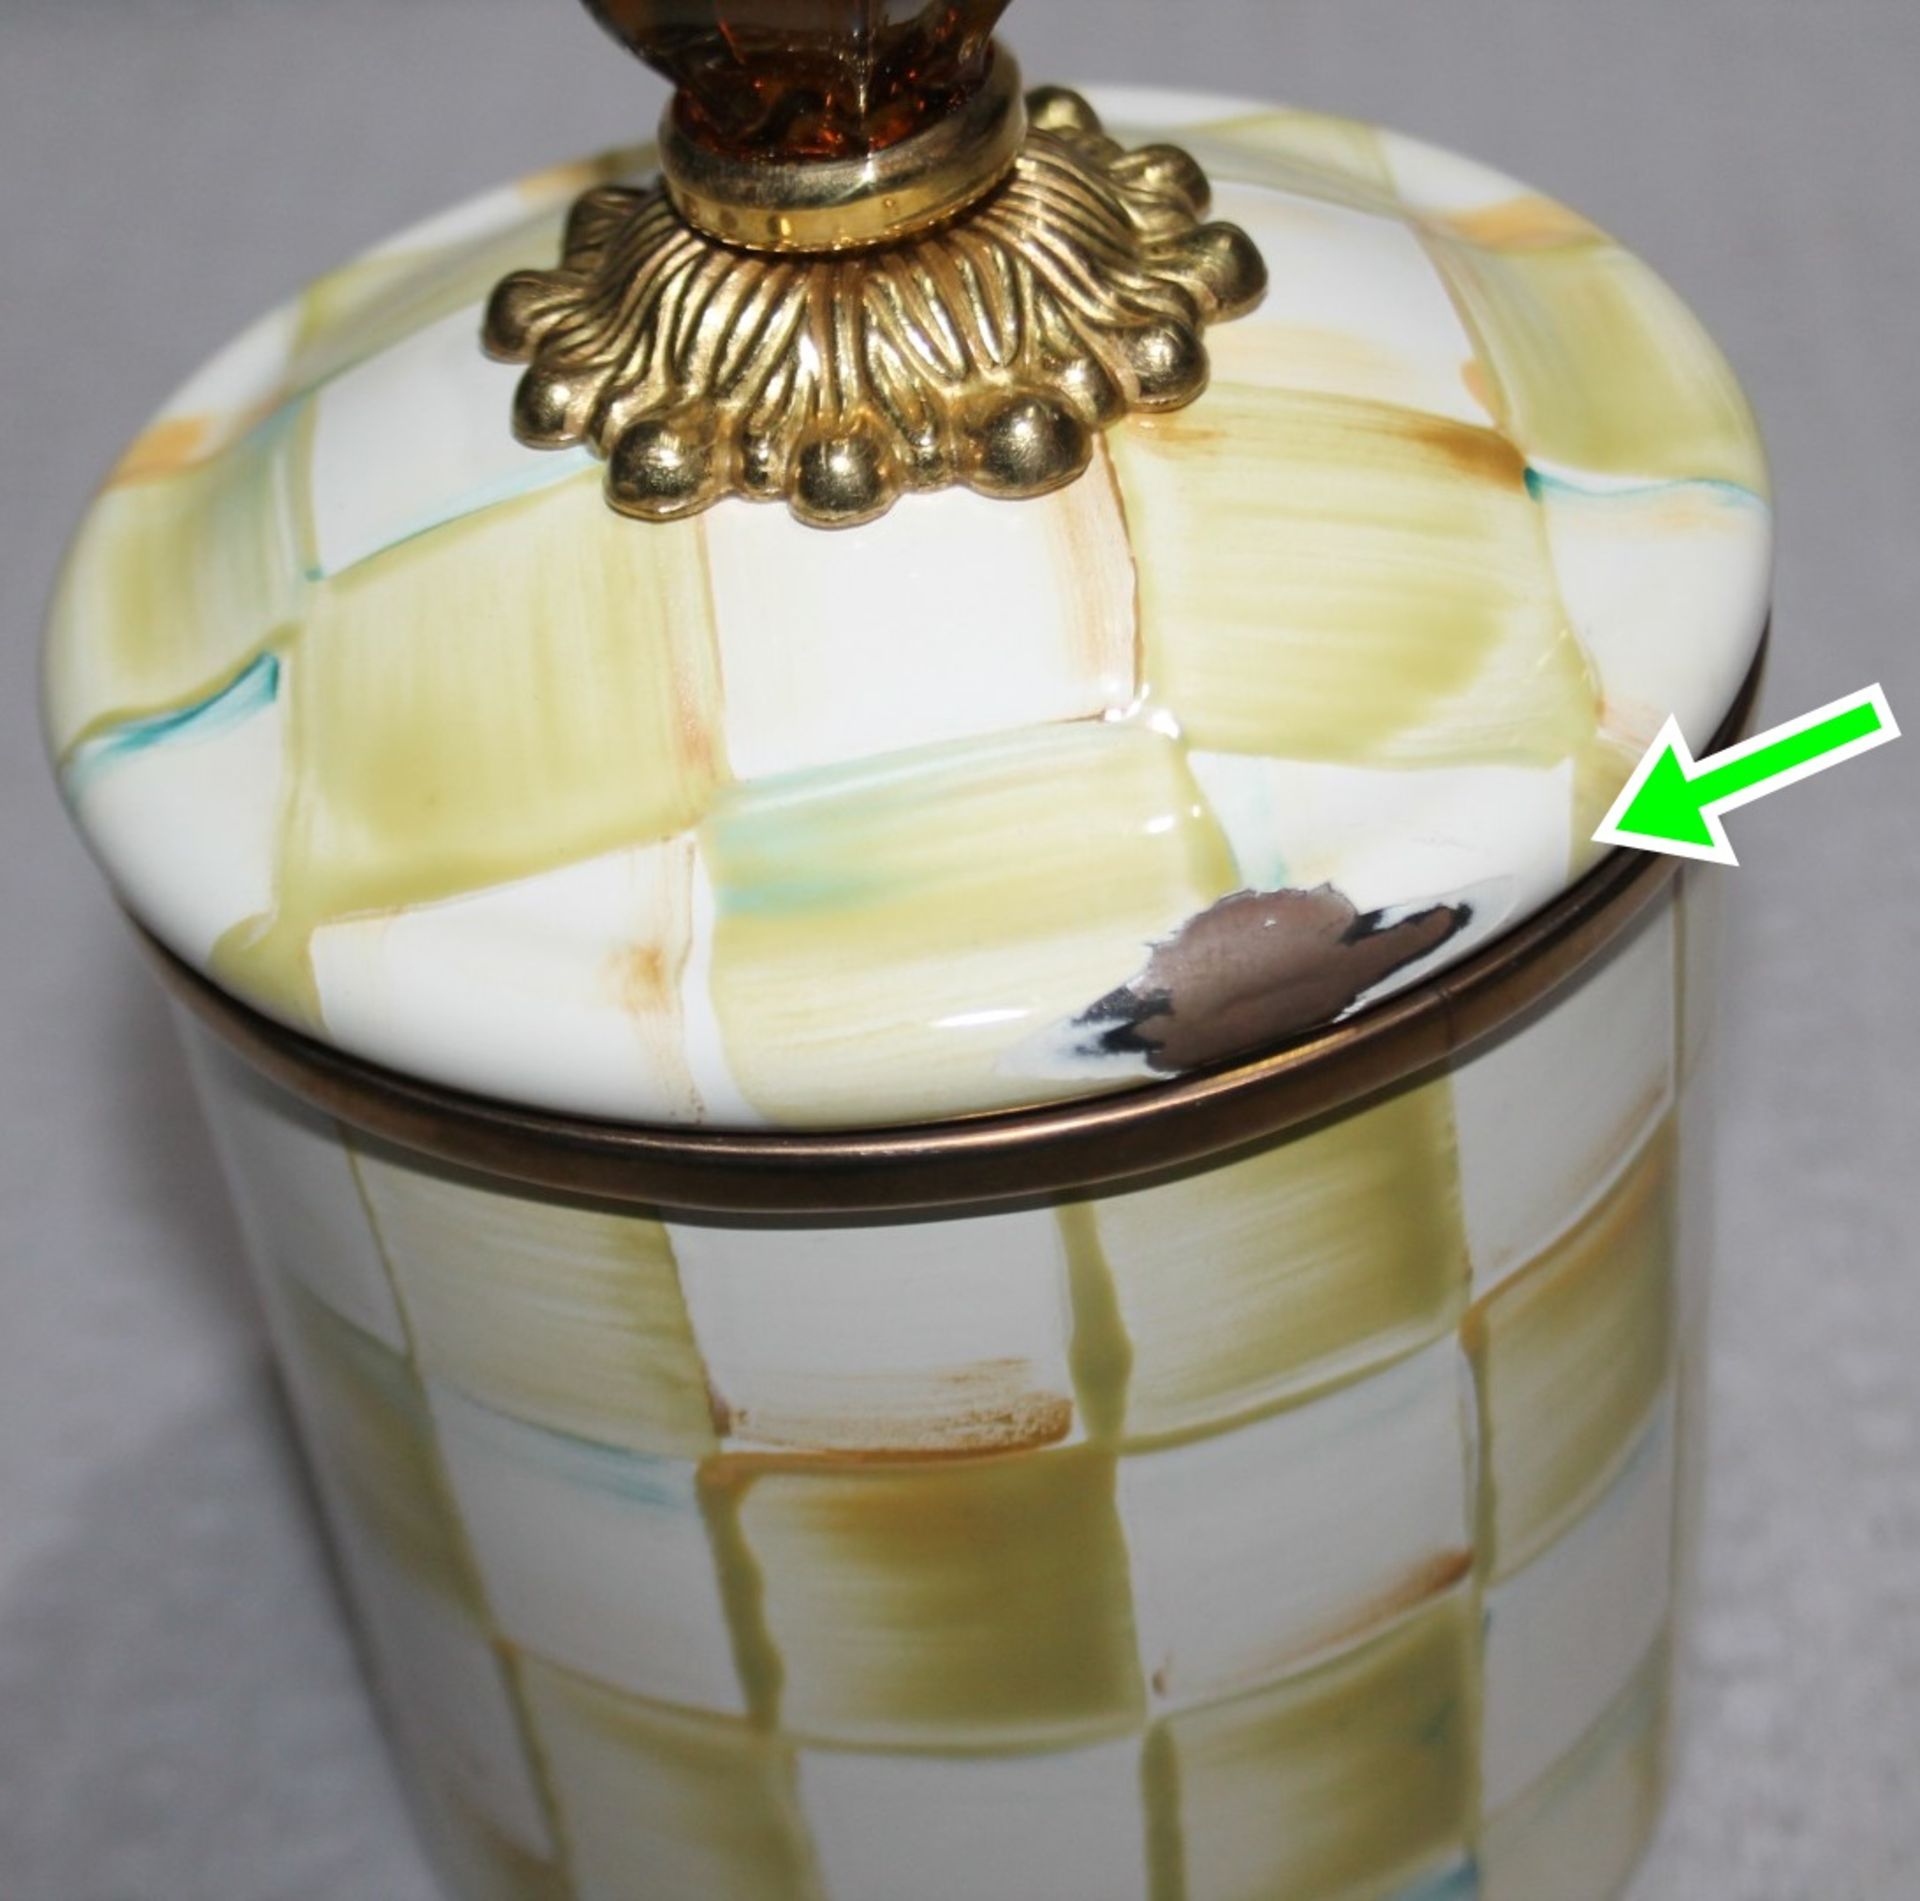 1 x MACKENZIE-CHILDS Small Parchment Check Enamel Canister - Original Price £97.00 - Ref: HAR280/ - Image 9 of 9